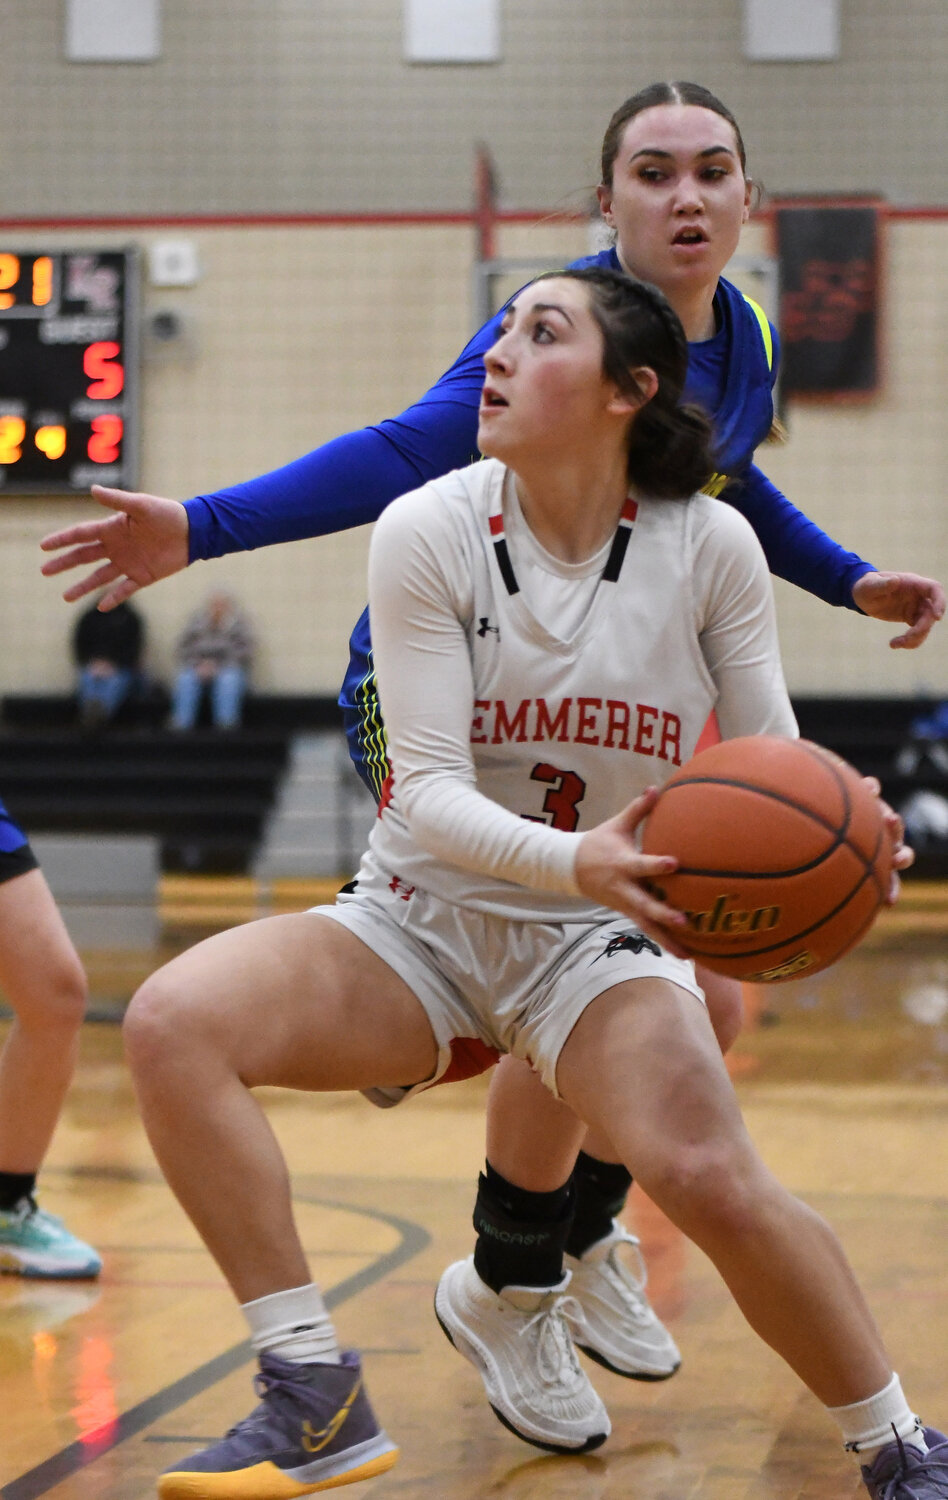 Notably absent from this year’s All-Conference list, Lady Ranger junior Natasha Martinez was a 2A Southwest All-Conference selection last season, and was deserving of the honor this season, according to head coach Phil Thatcher. Martinez — along with teammates Janae Skidmore and Ella Thatcher — will form the nucleus of next year’s Lady Rangers team.